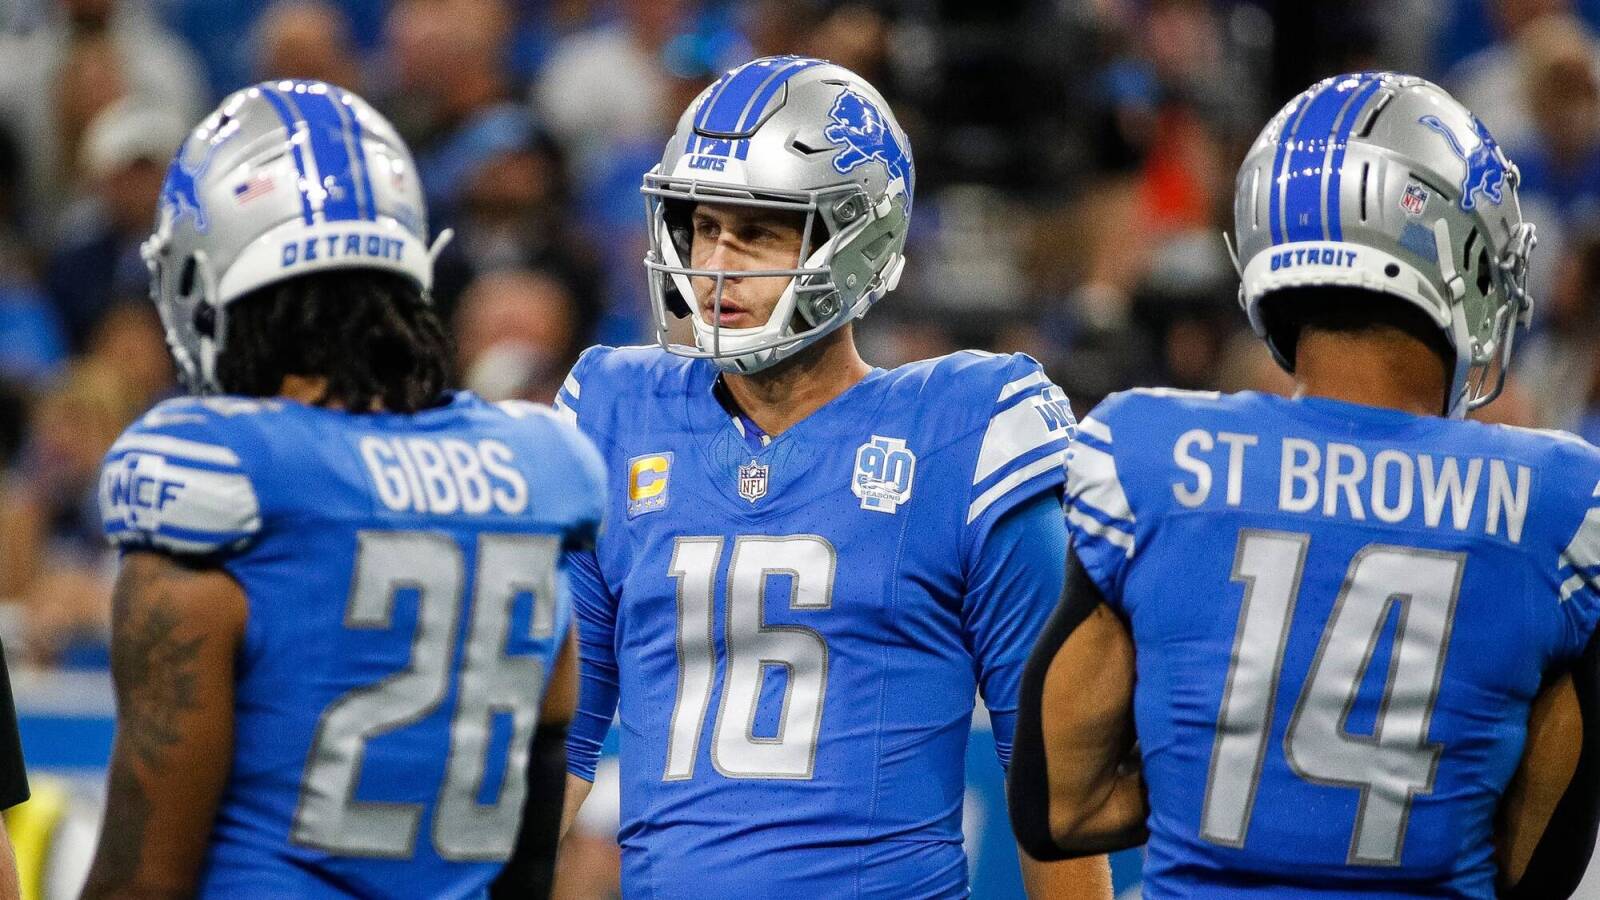 Week 4 NFC North predictions: Lions will emerge with early division lead